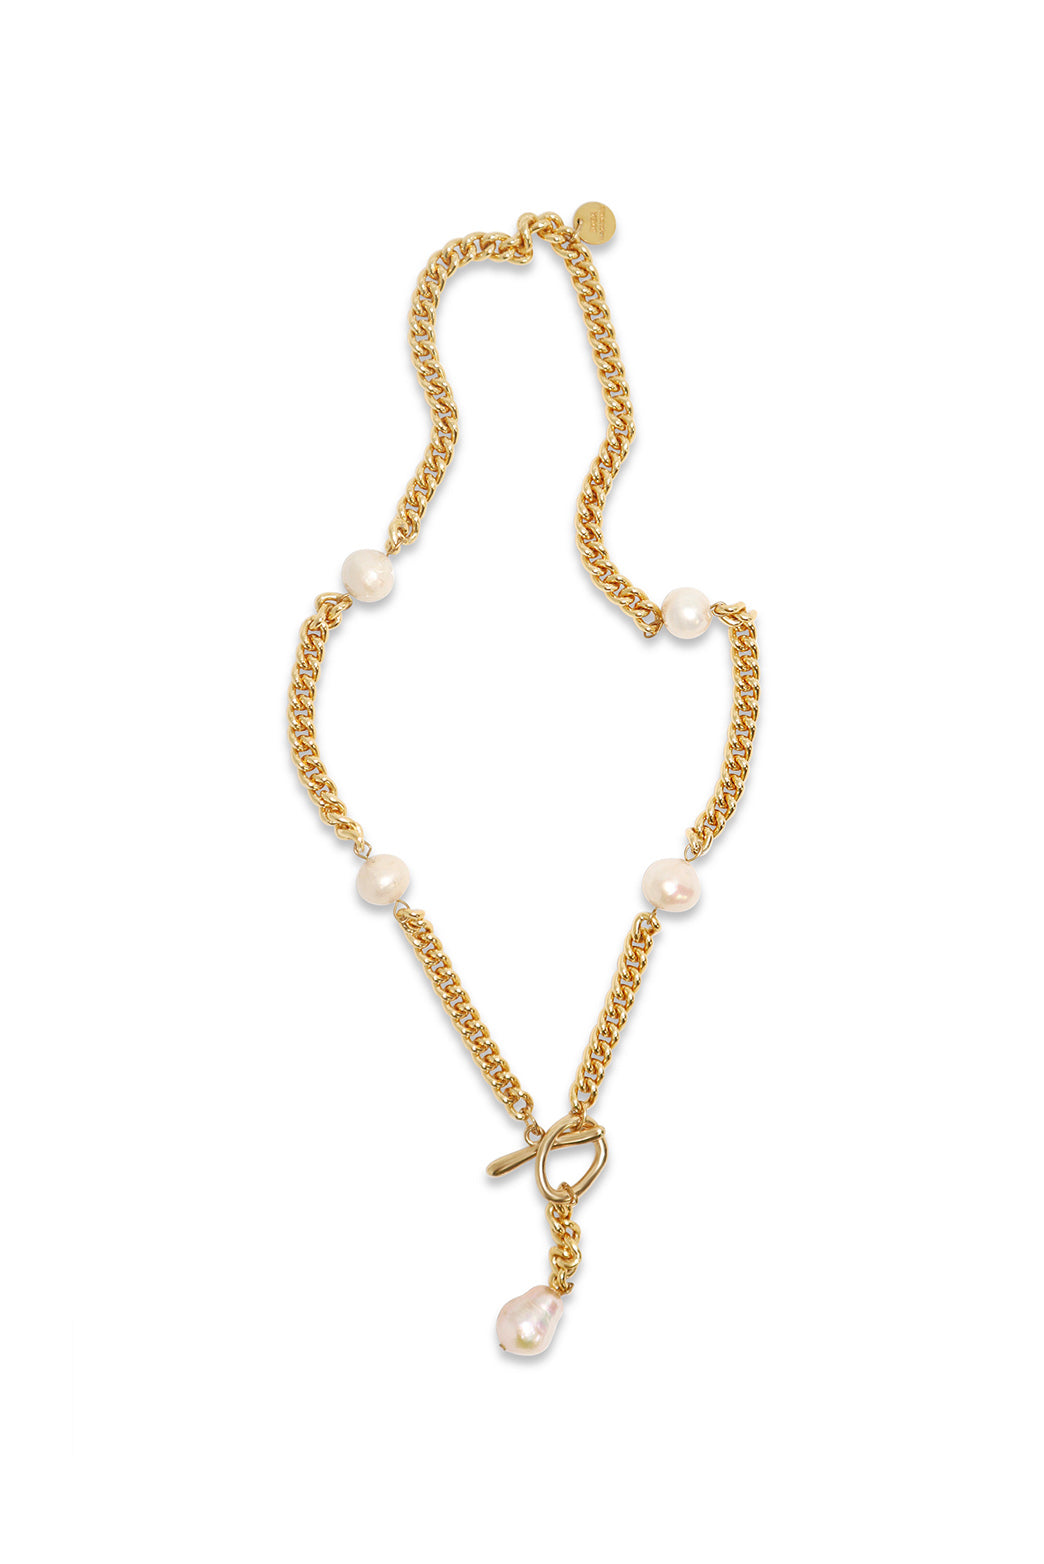 IK Plated Gold Necklace with Pearls